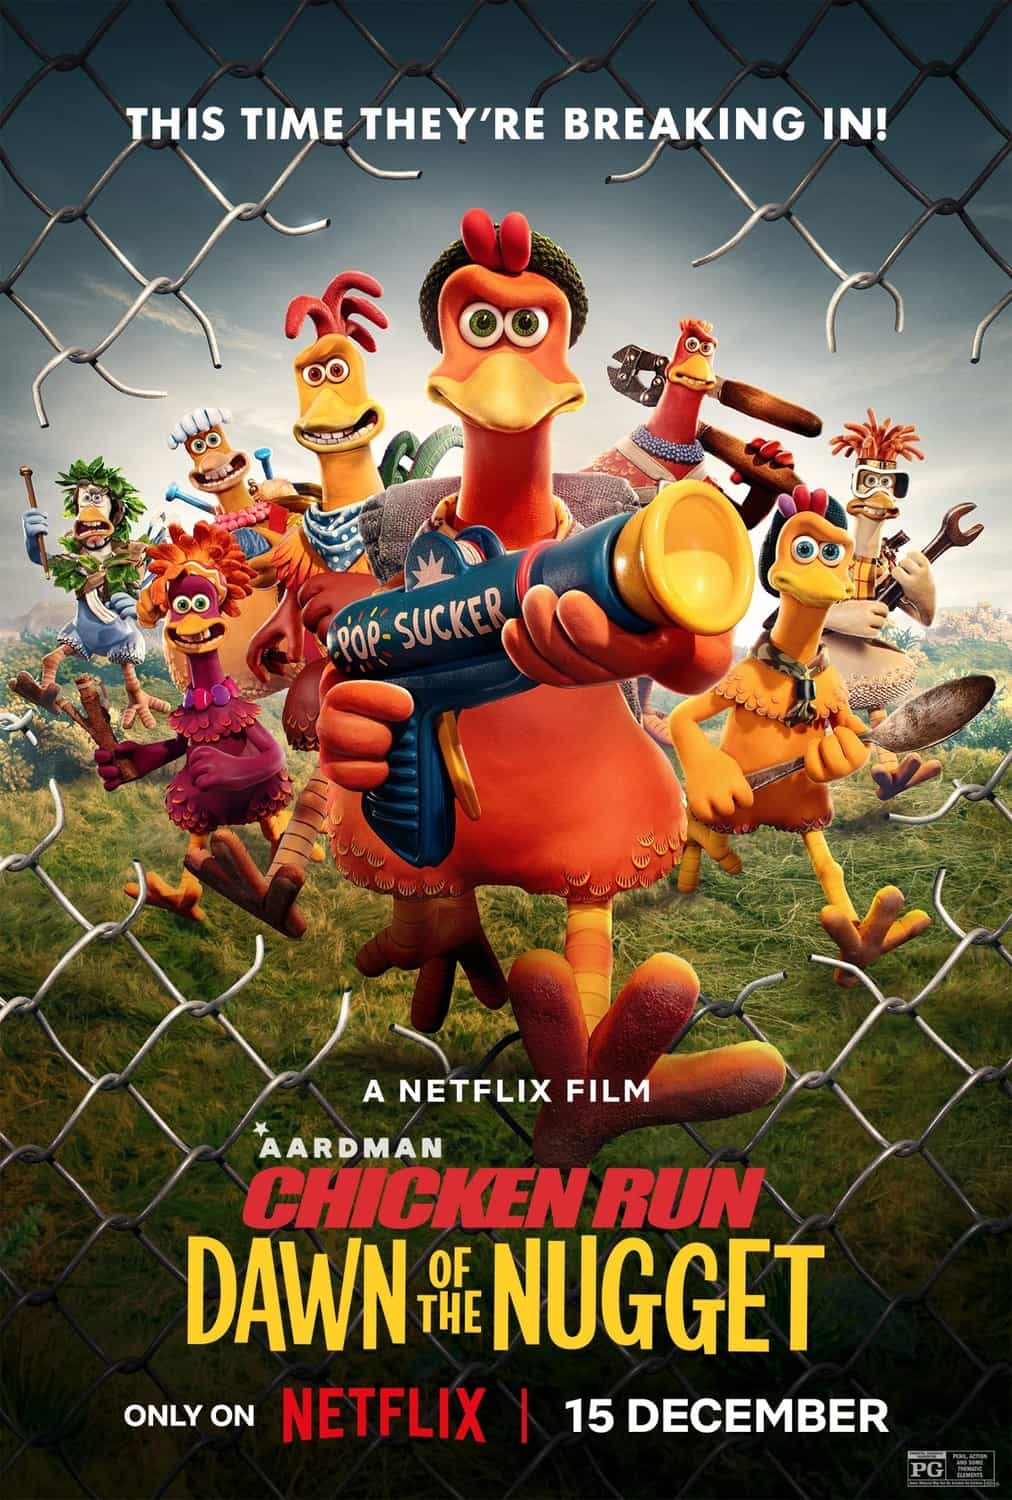 Check out the new trailer and poster for upcoming movie Chicken Run: Dawn of the Nugget which stars Bella Ramsey and Zachary Levi - movie UK release date 15th December 2023 #chickenrundawnofthenugget